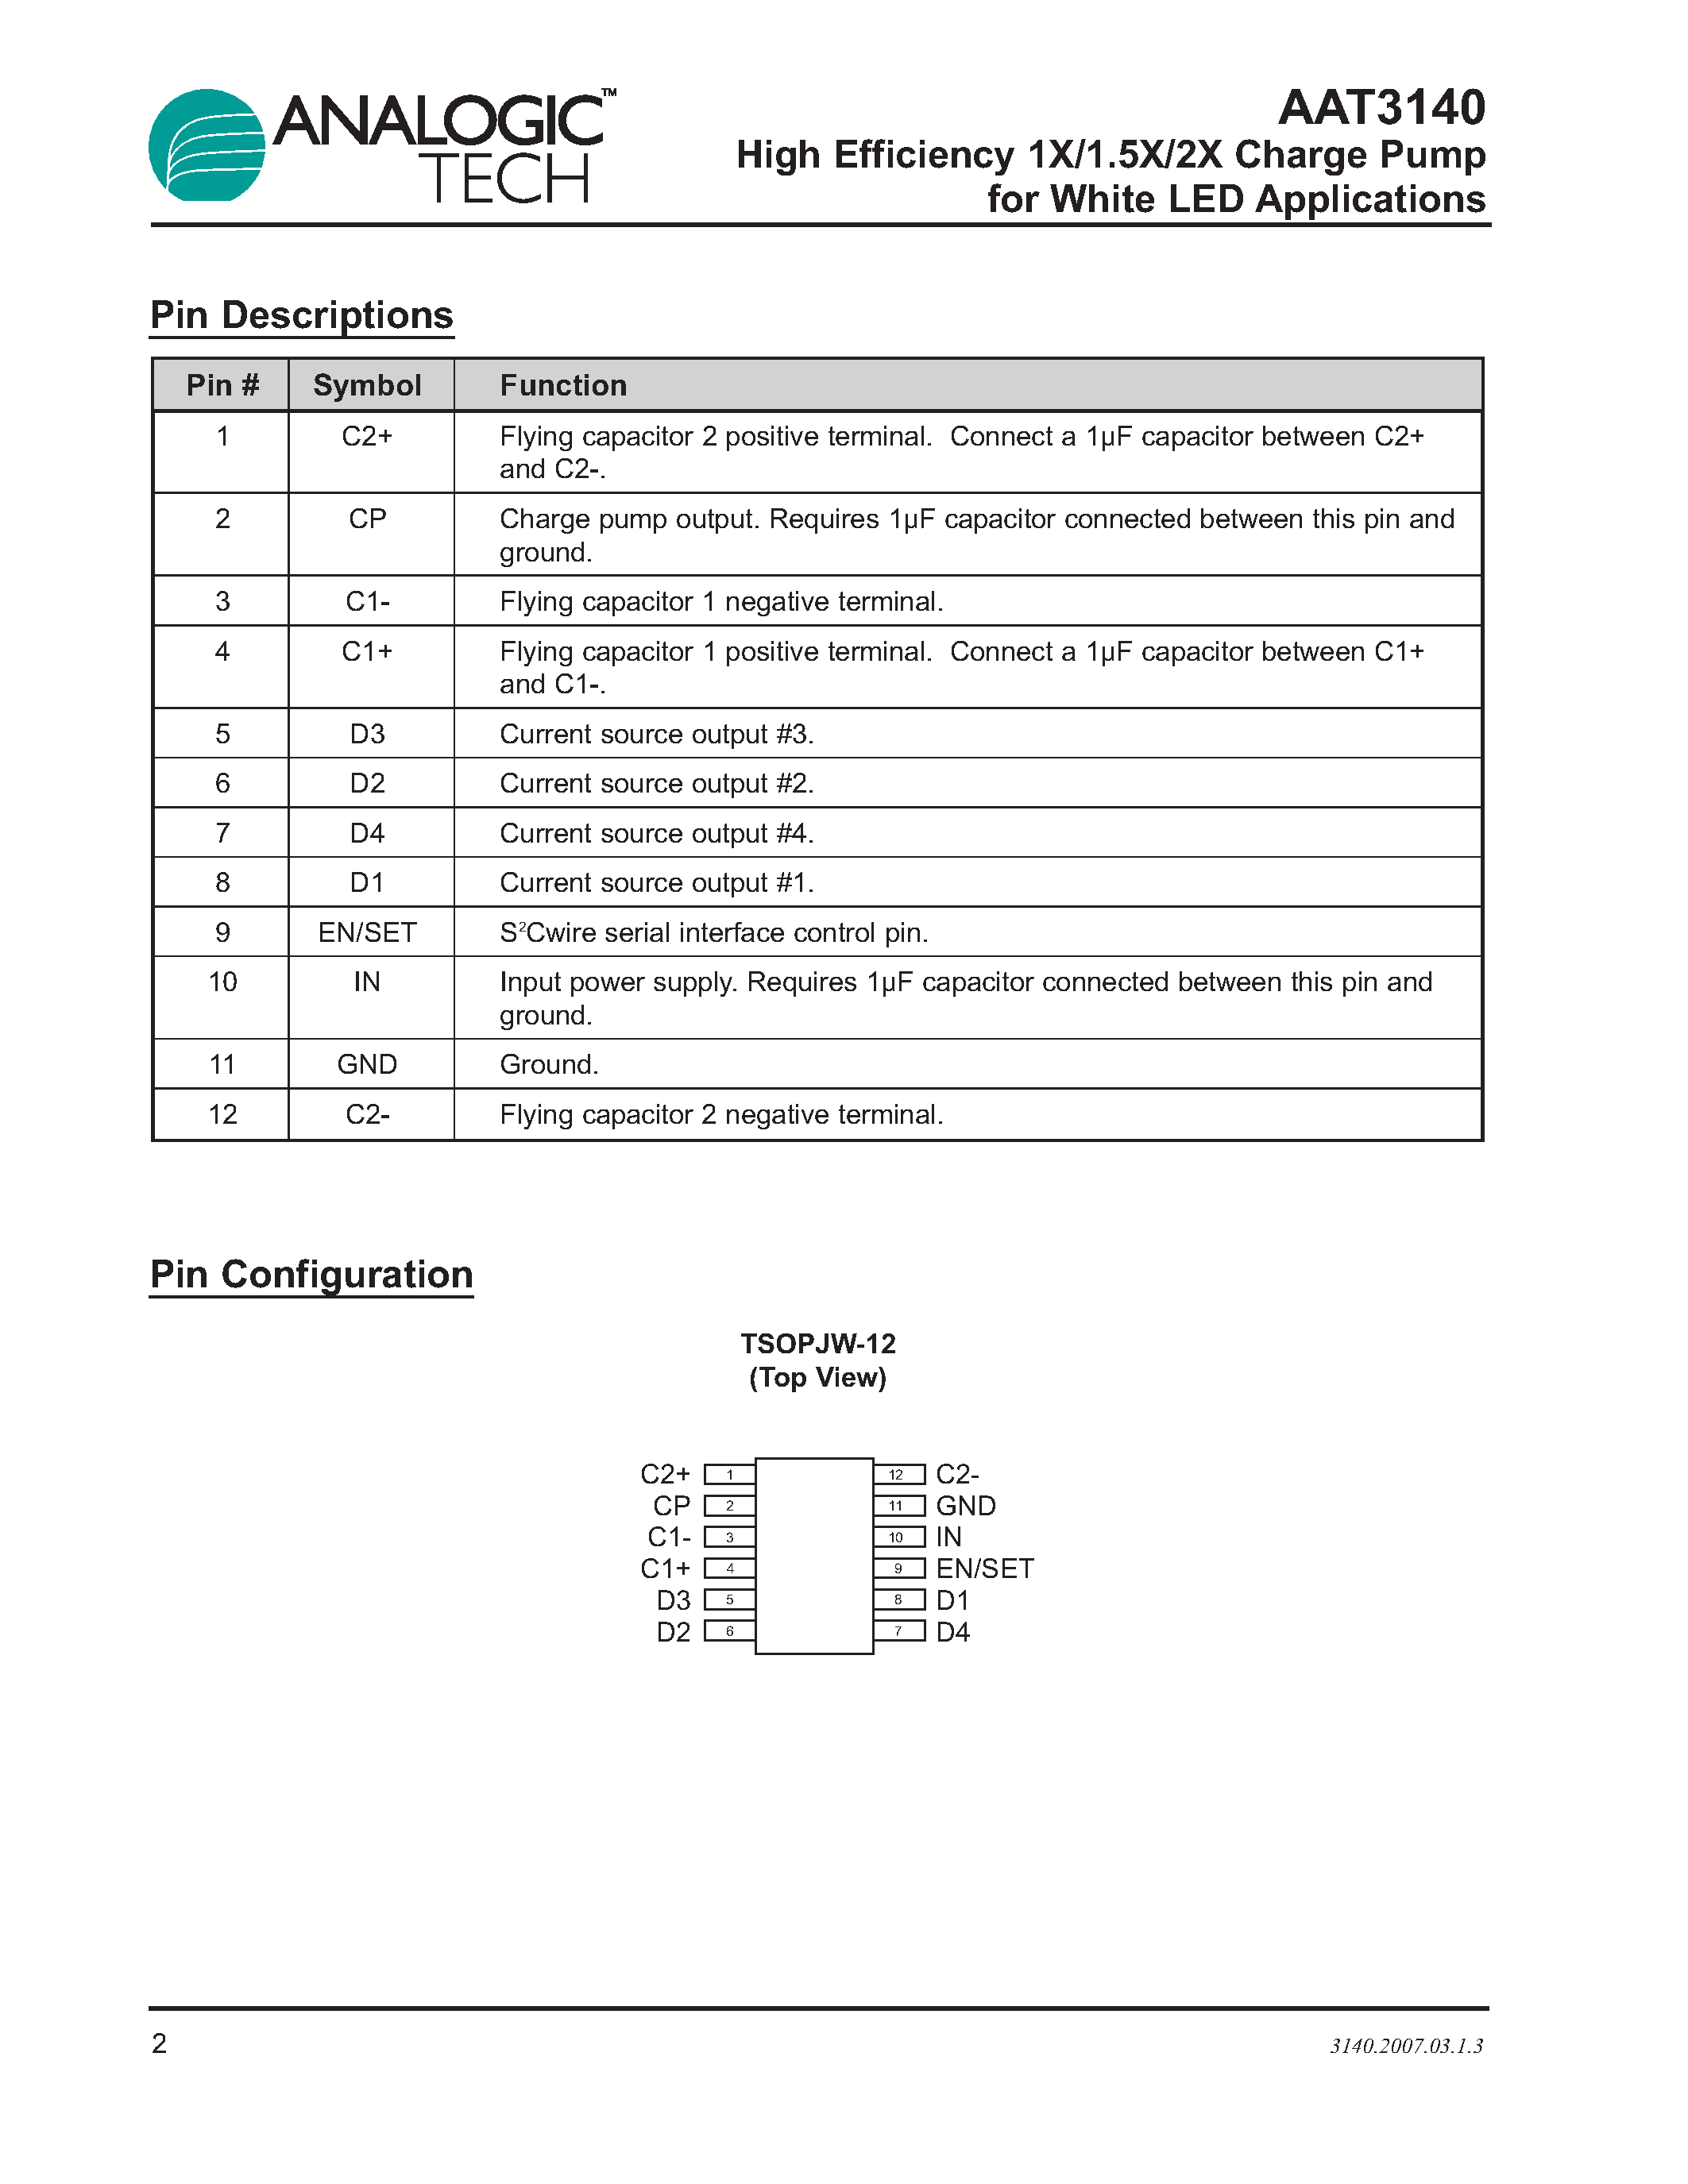 Datasheet AAT3140 - High Efficiency 1X/1.5X/2X Charge Pump page 2